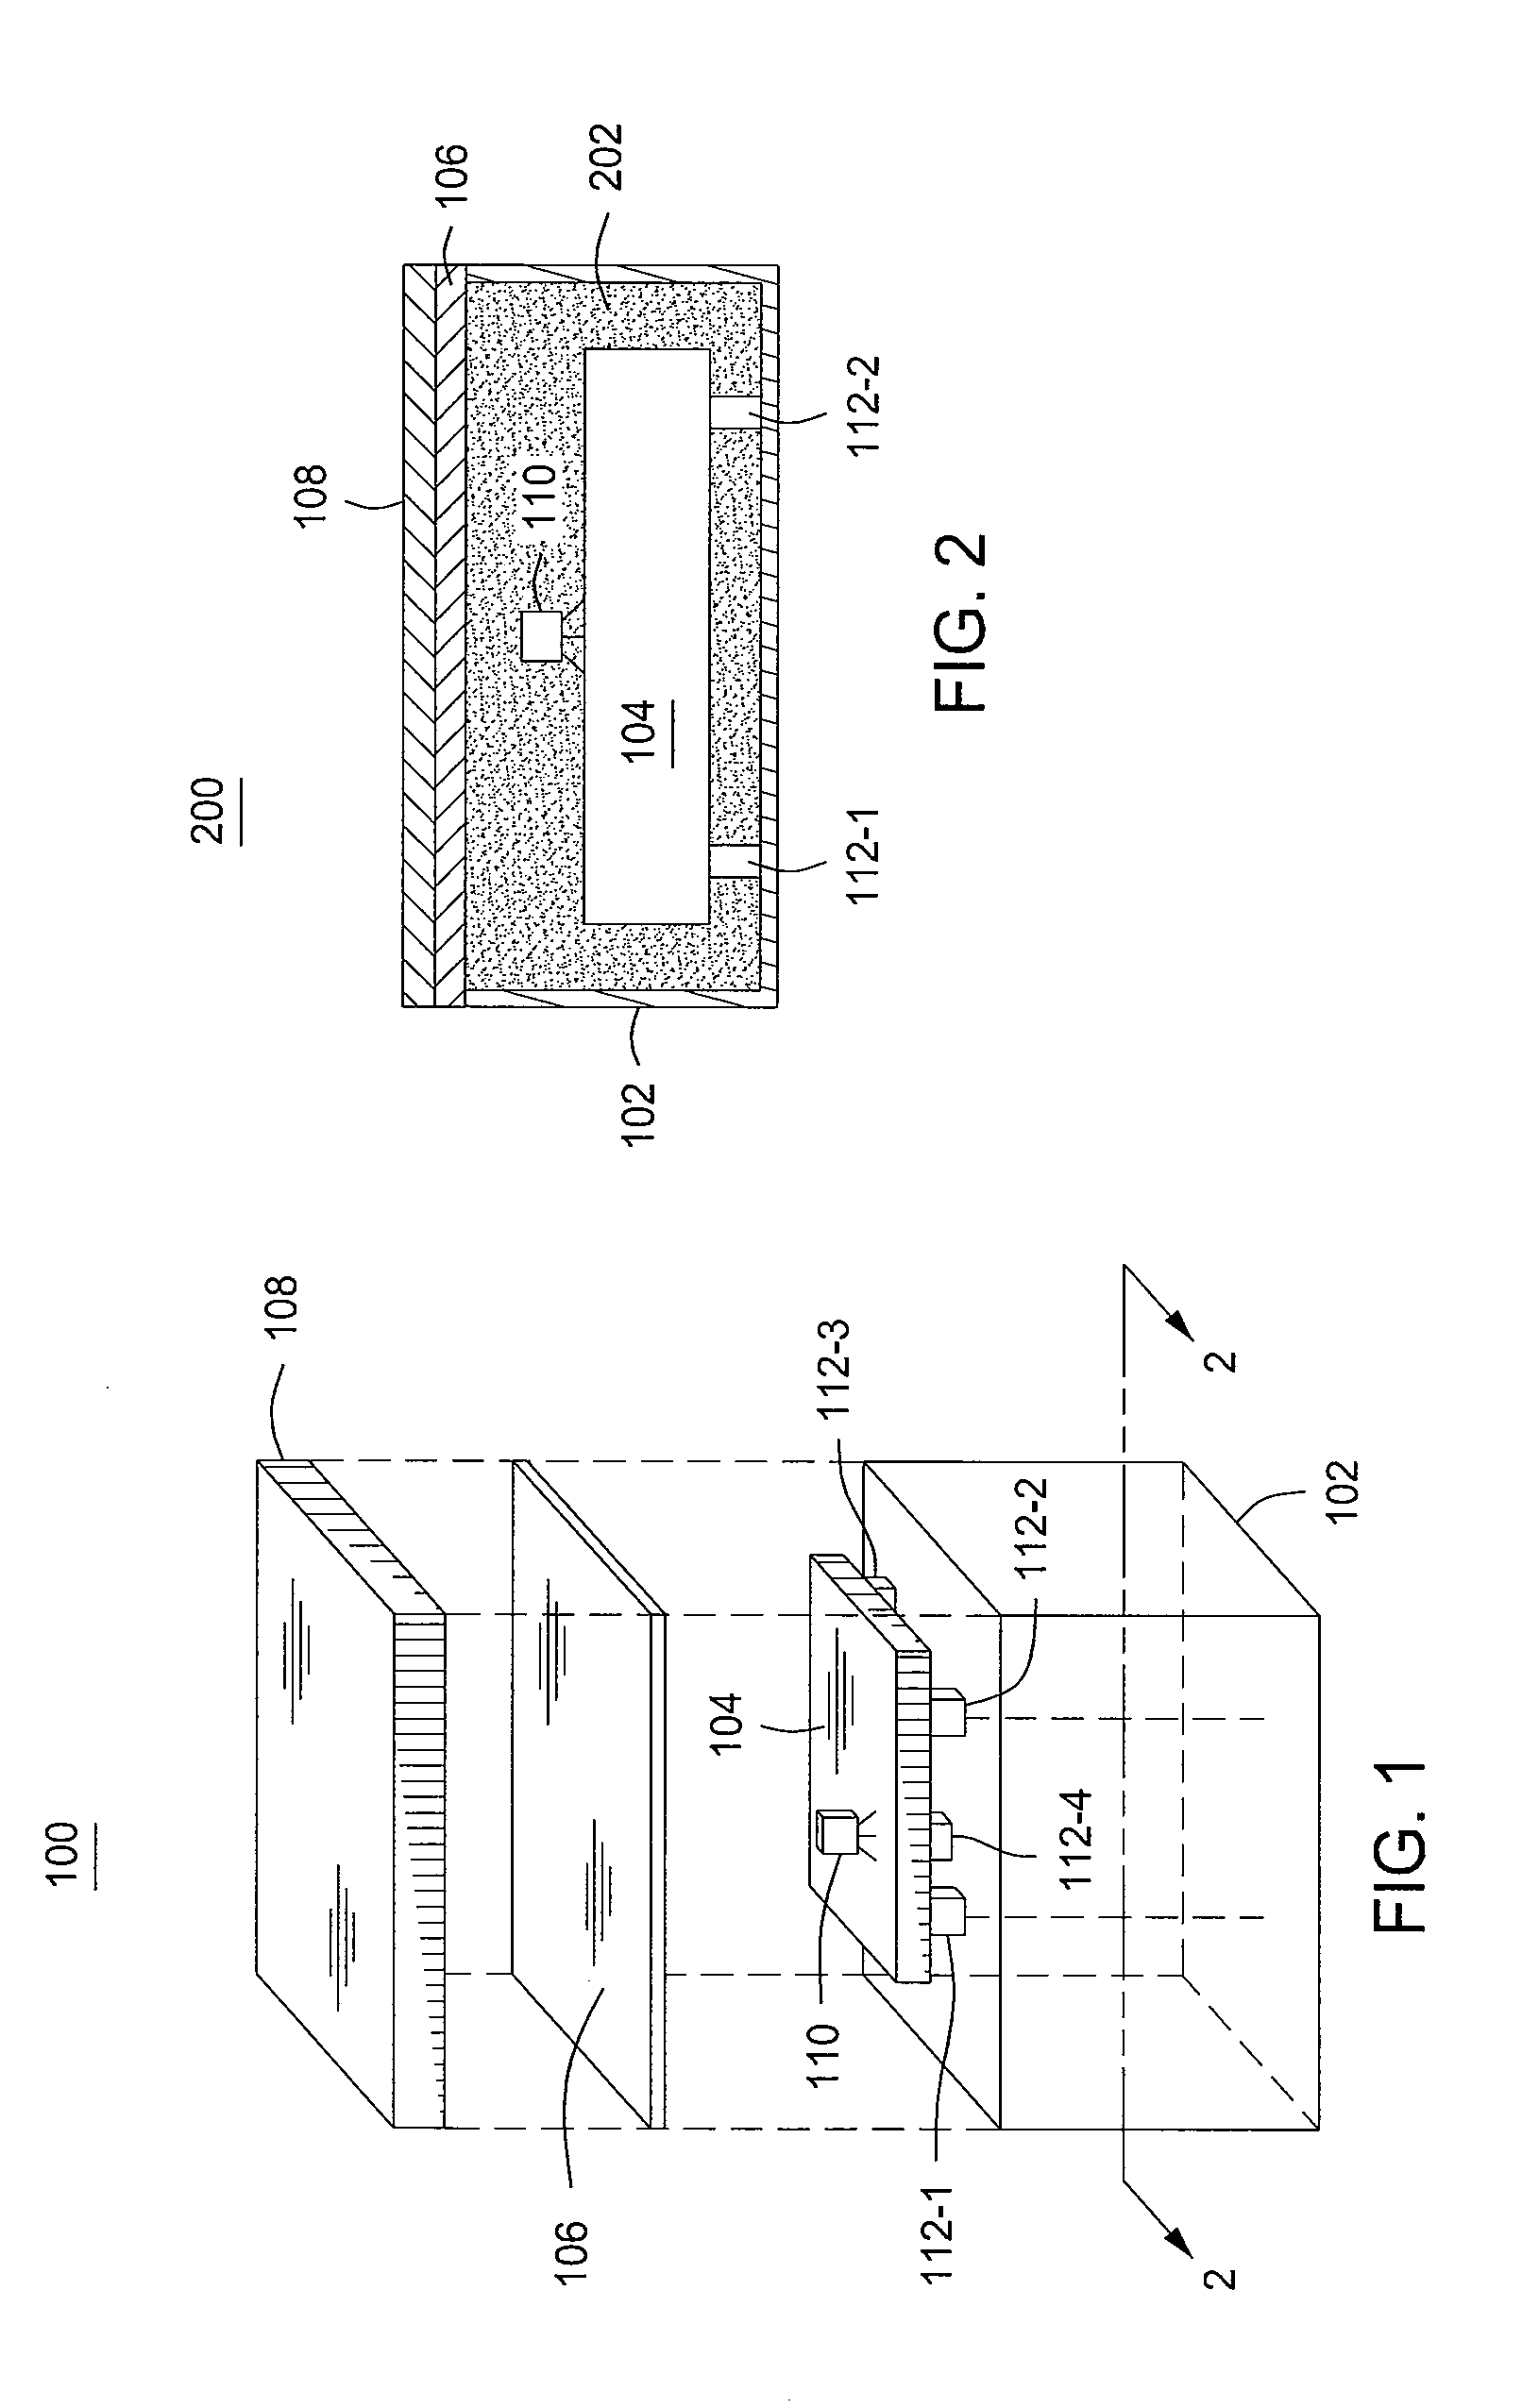 Method and apparatus for reducing pressure effects on an encapsulated device